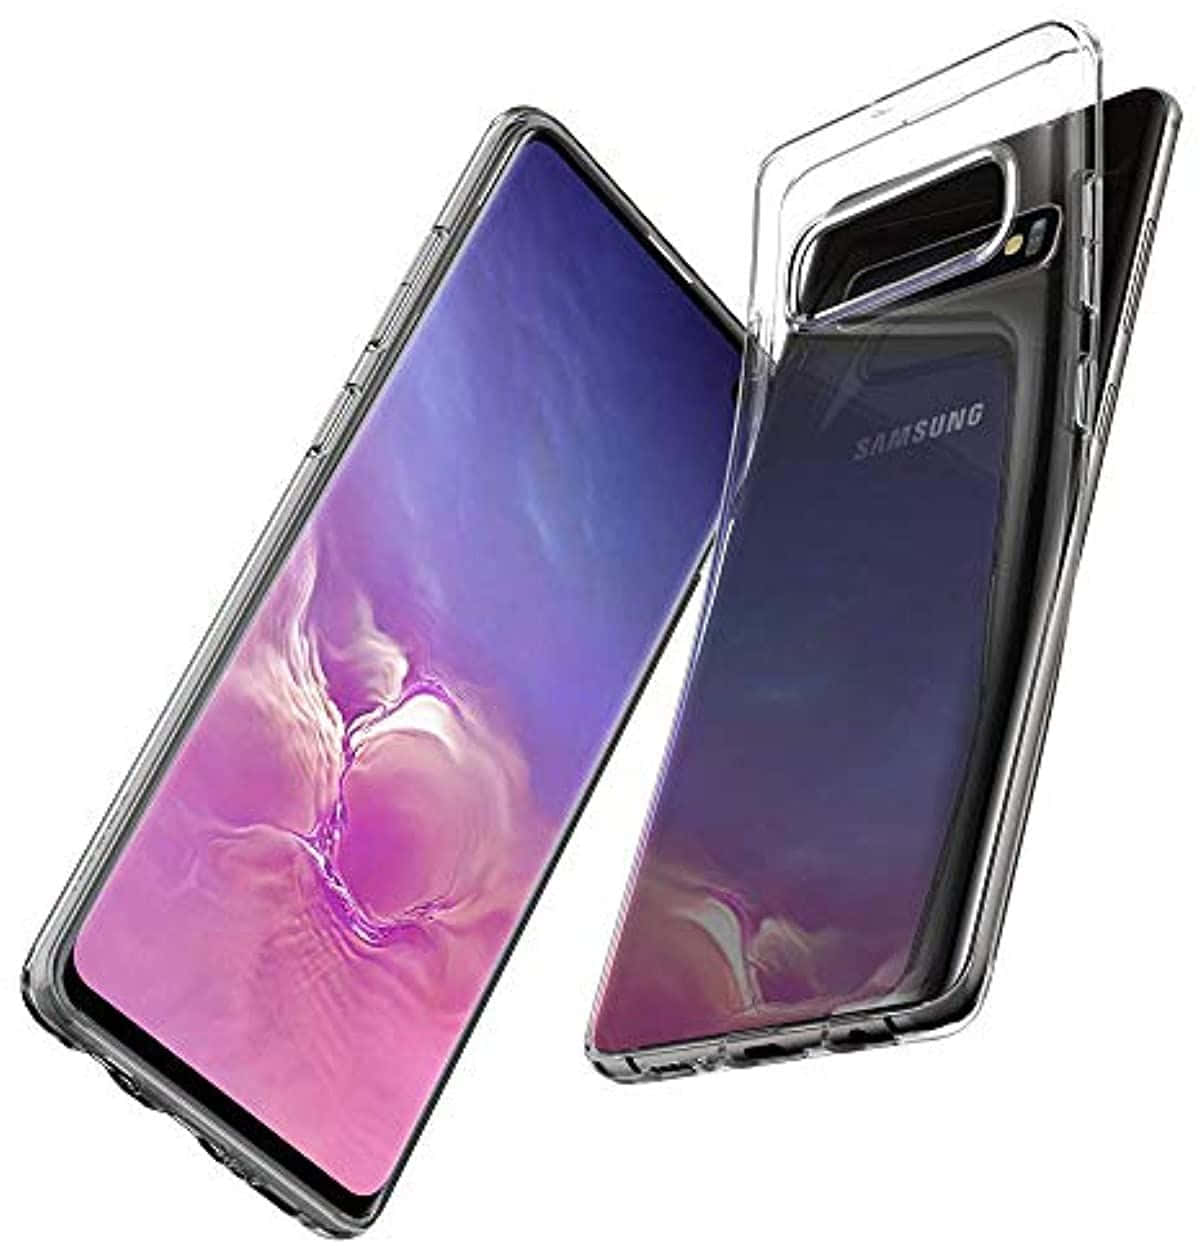 Get the Samsung Galaxy S10 for Cutting-Edge Technology